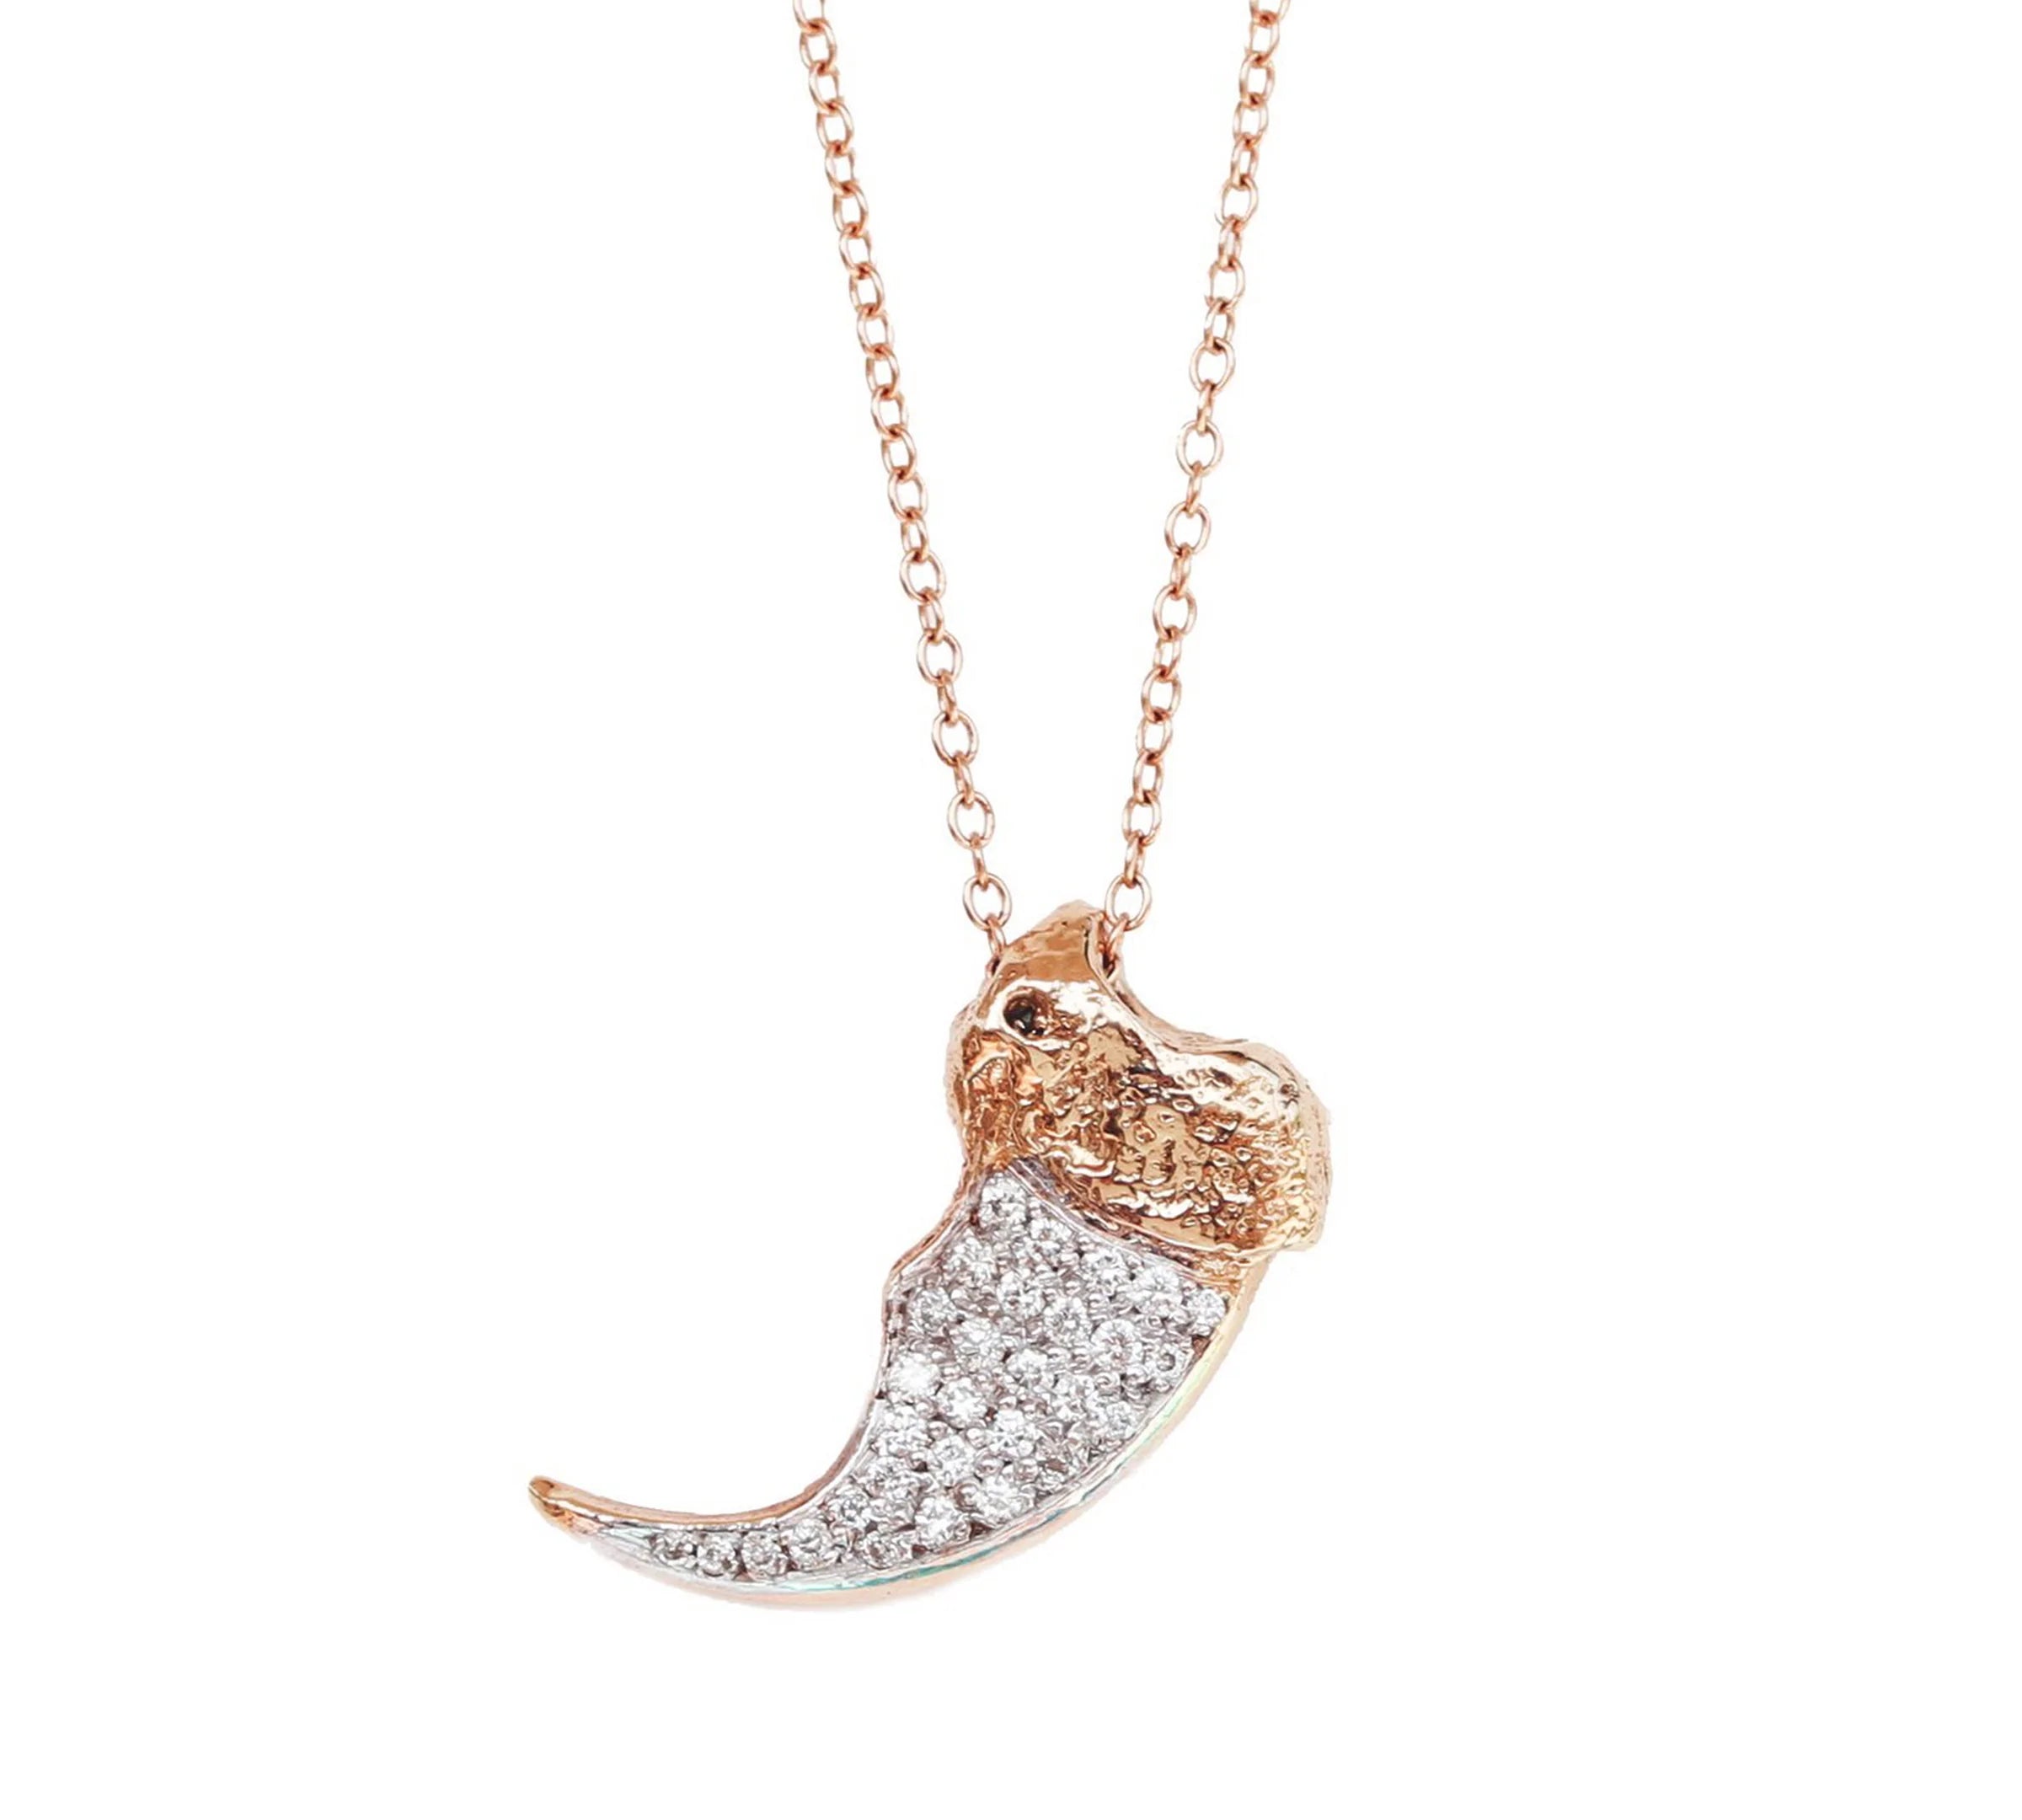 Wolverine Claw Necklace Pendant Elisabeth Bell Jewelry Rose Gold  